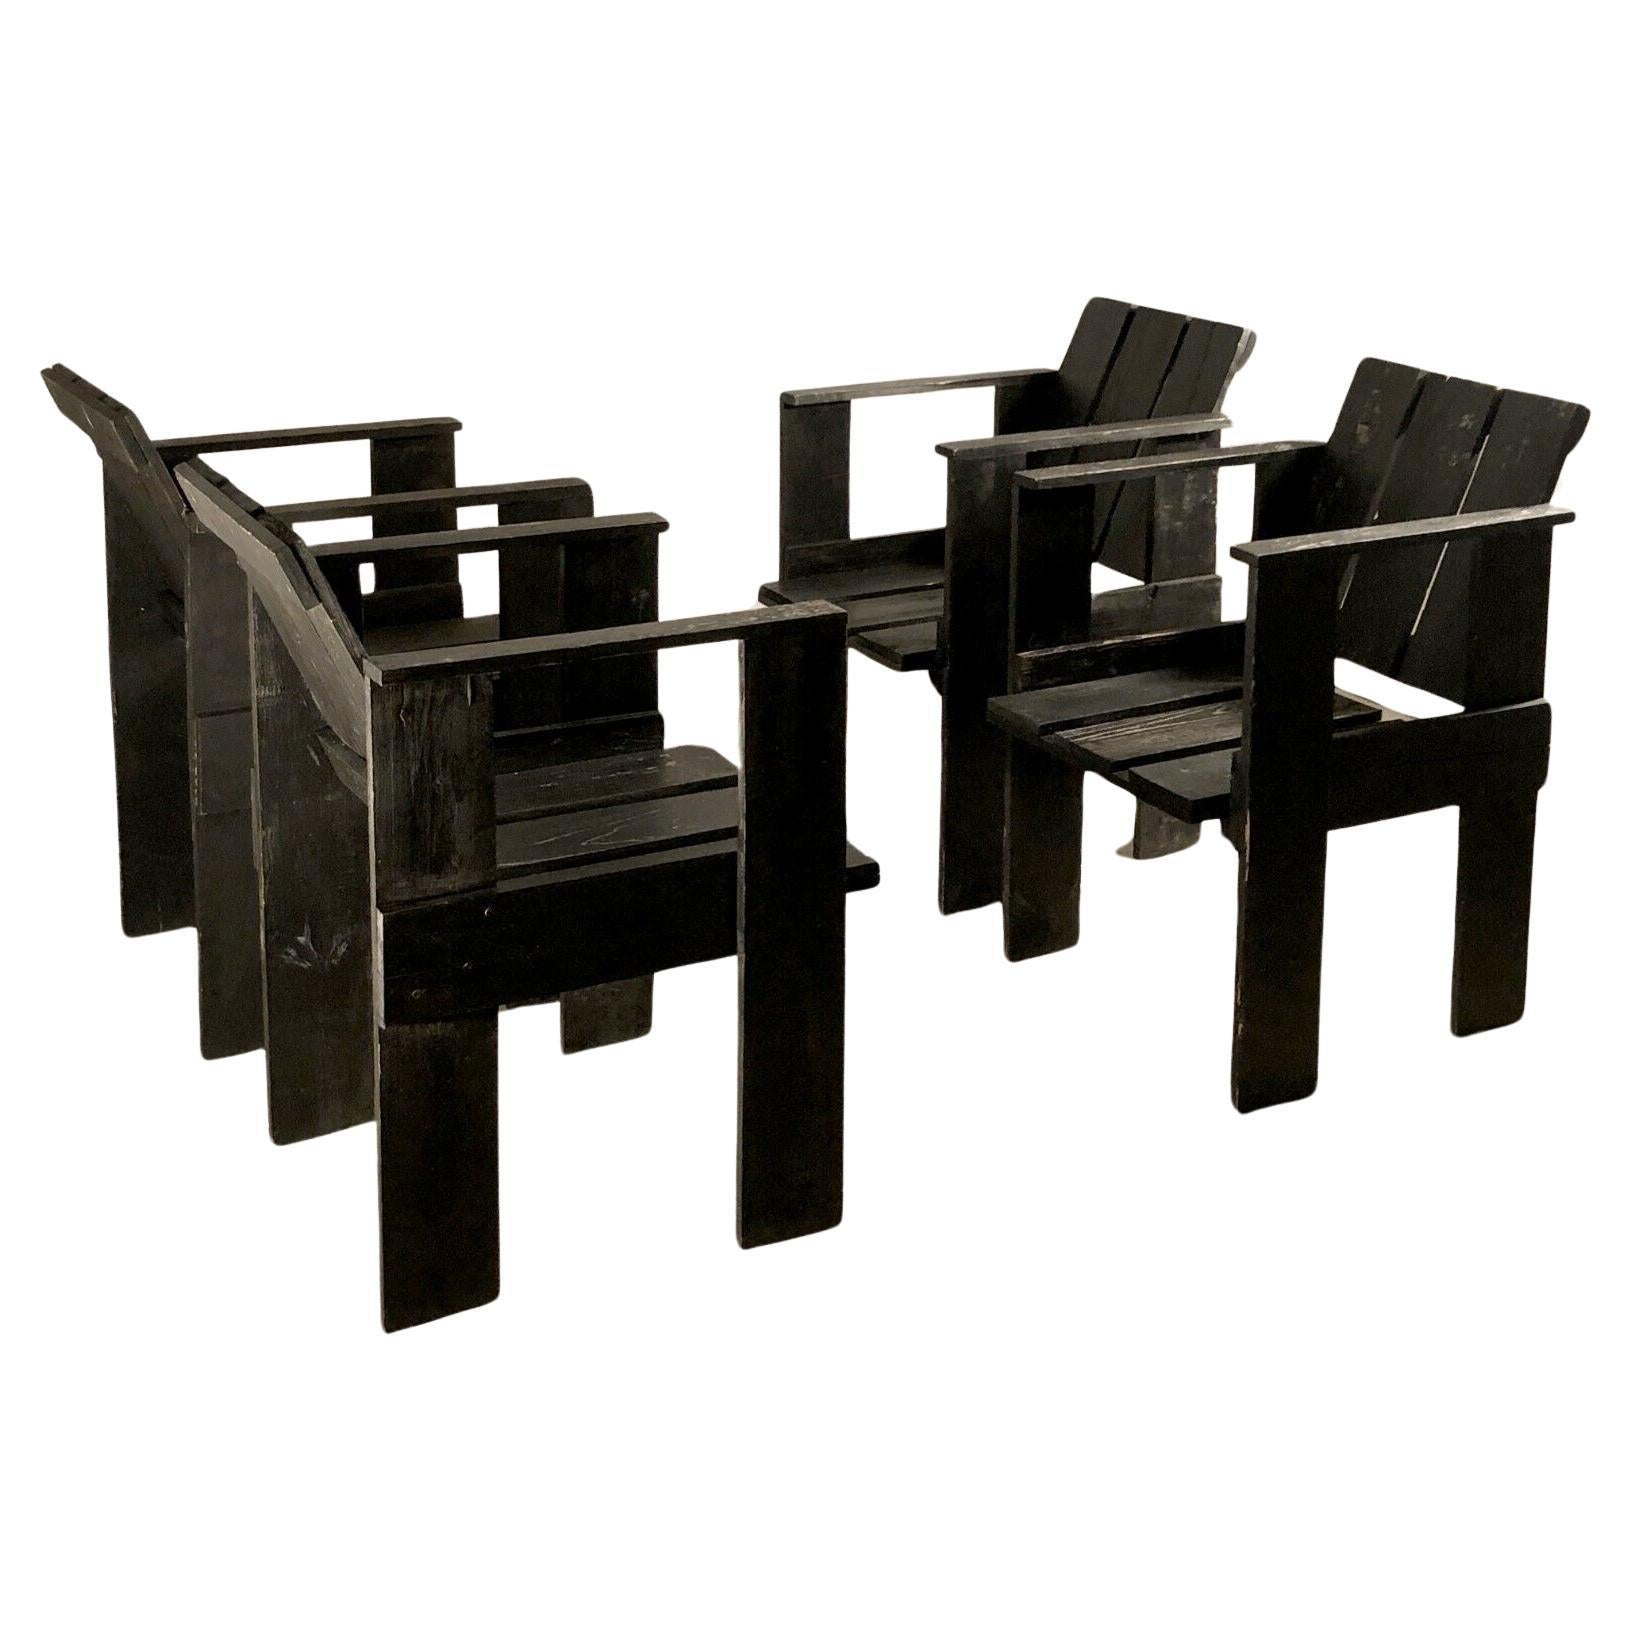 A Set Of 4 MODERNIST CUBIST "CRATE" CHAIRS after GERRIT RIETVELD, Holland  1980